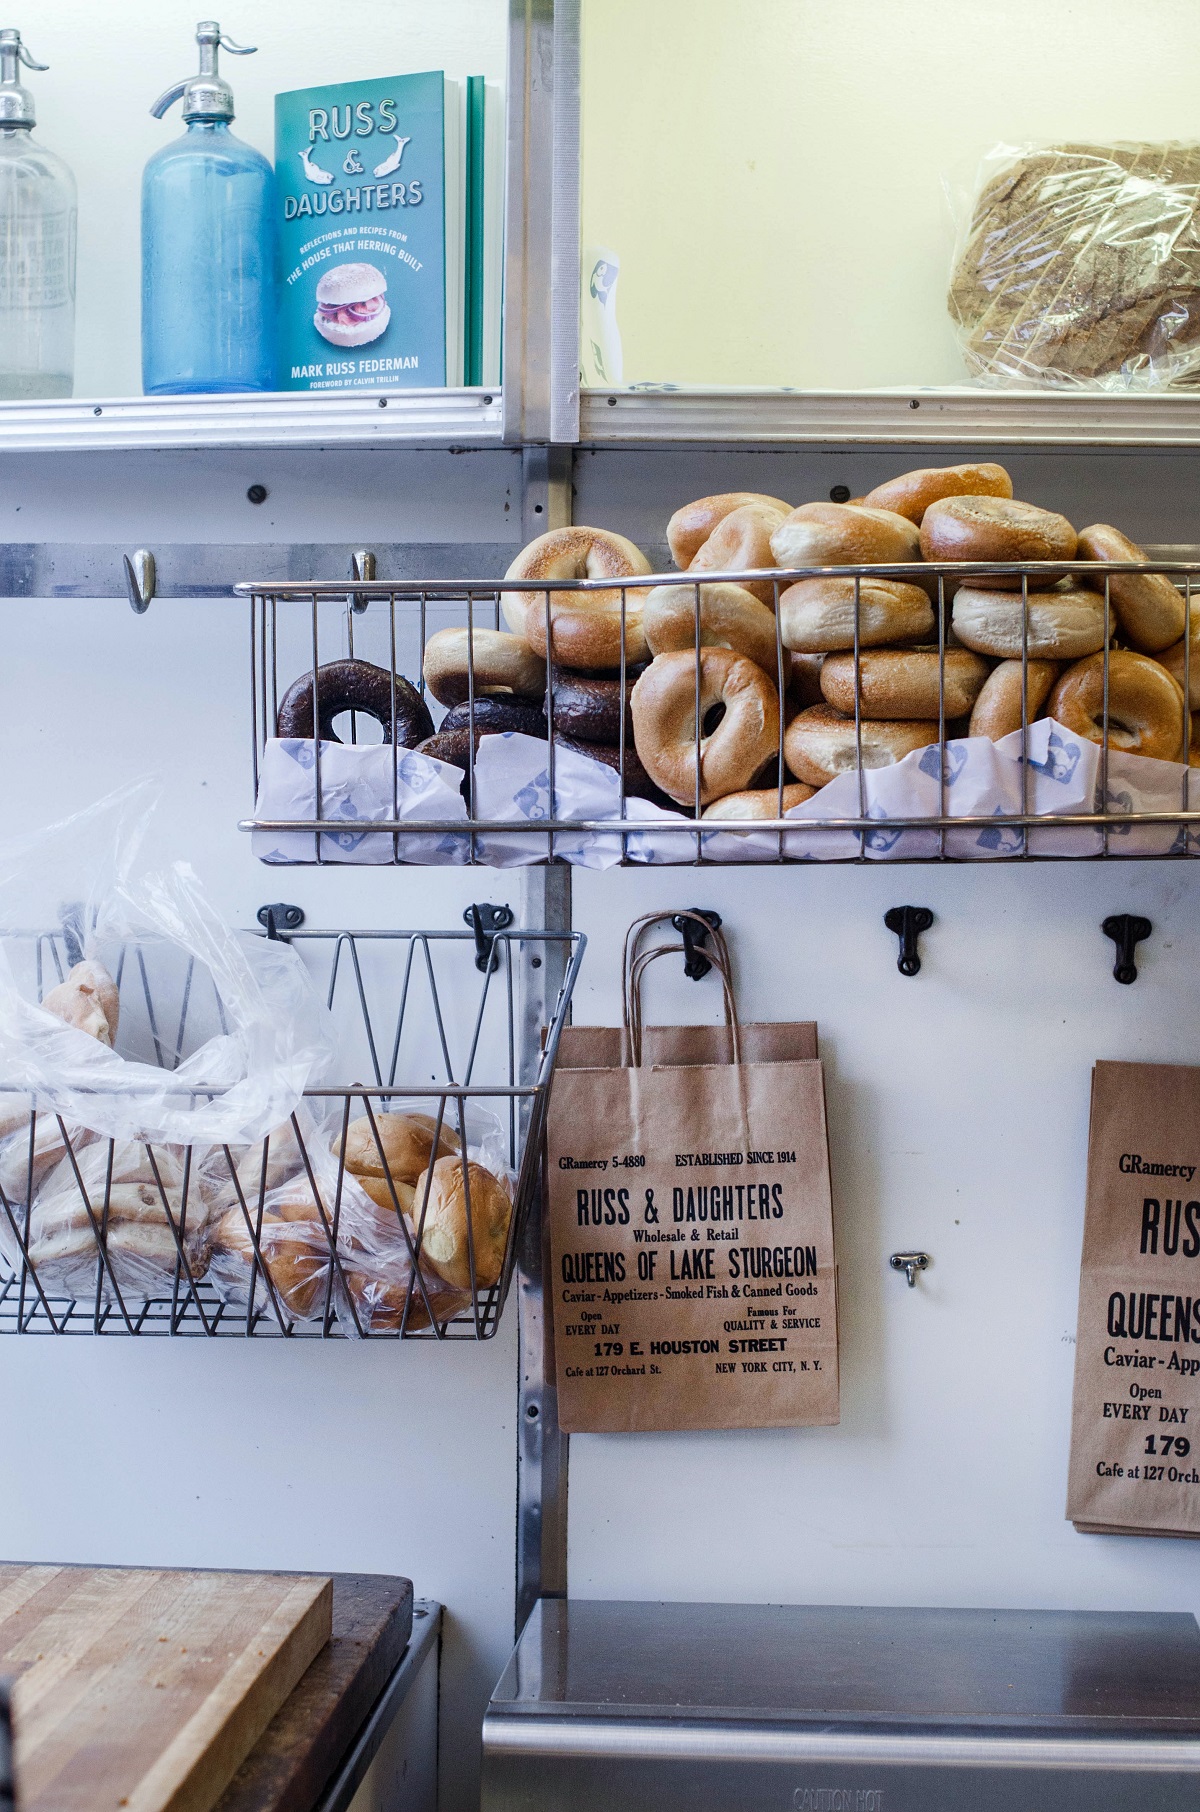 Russ & Daughters is often considered to make the best bagels in the Big Apple. 